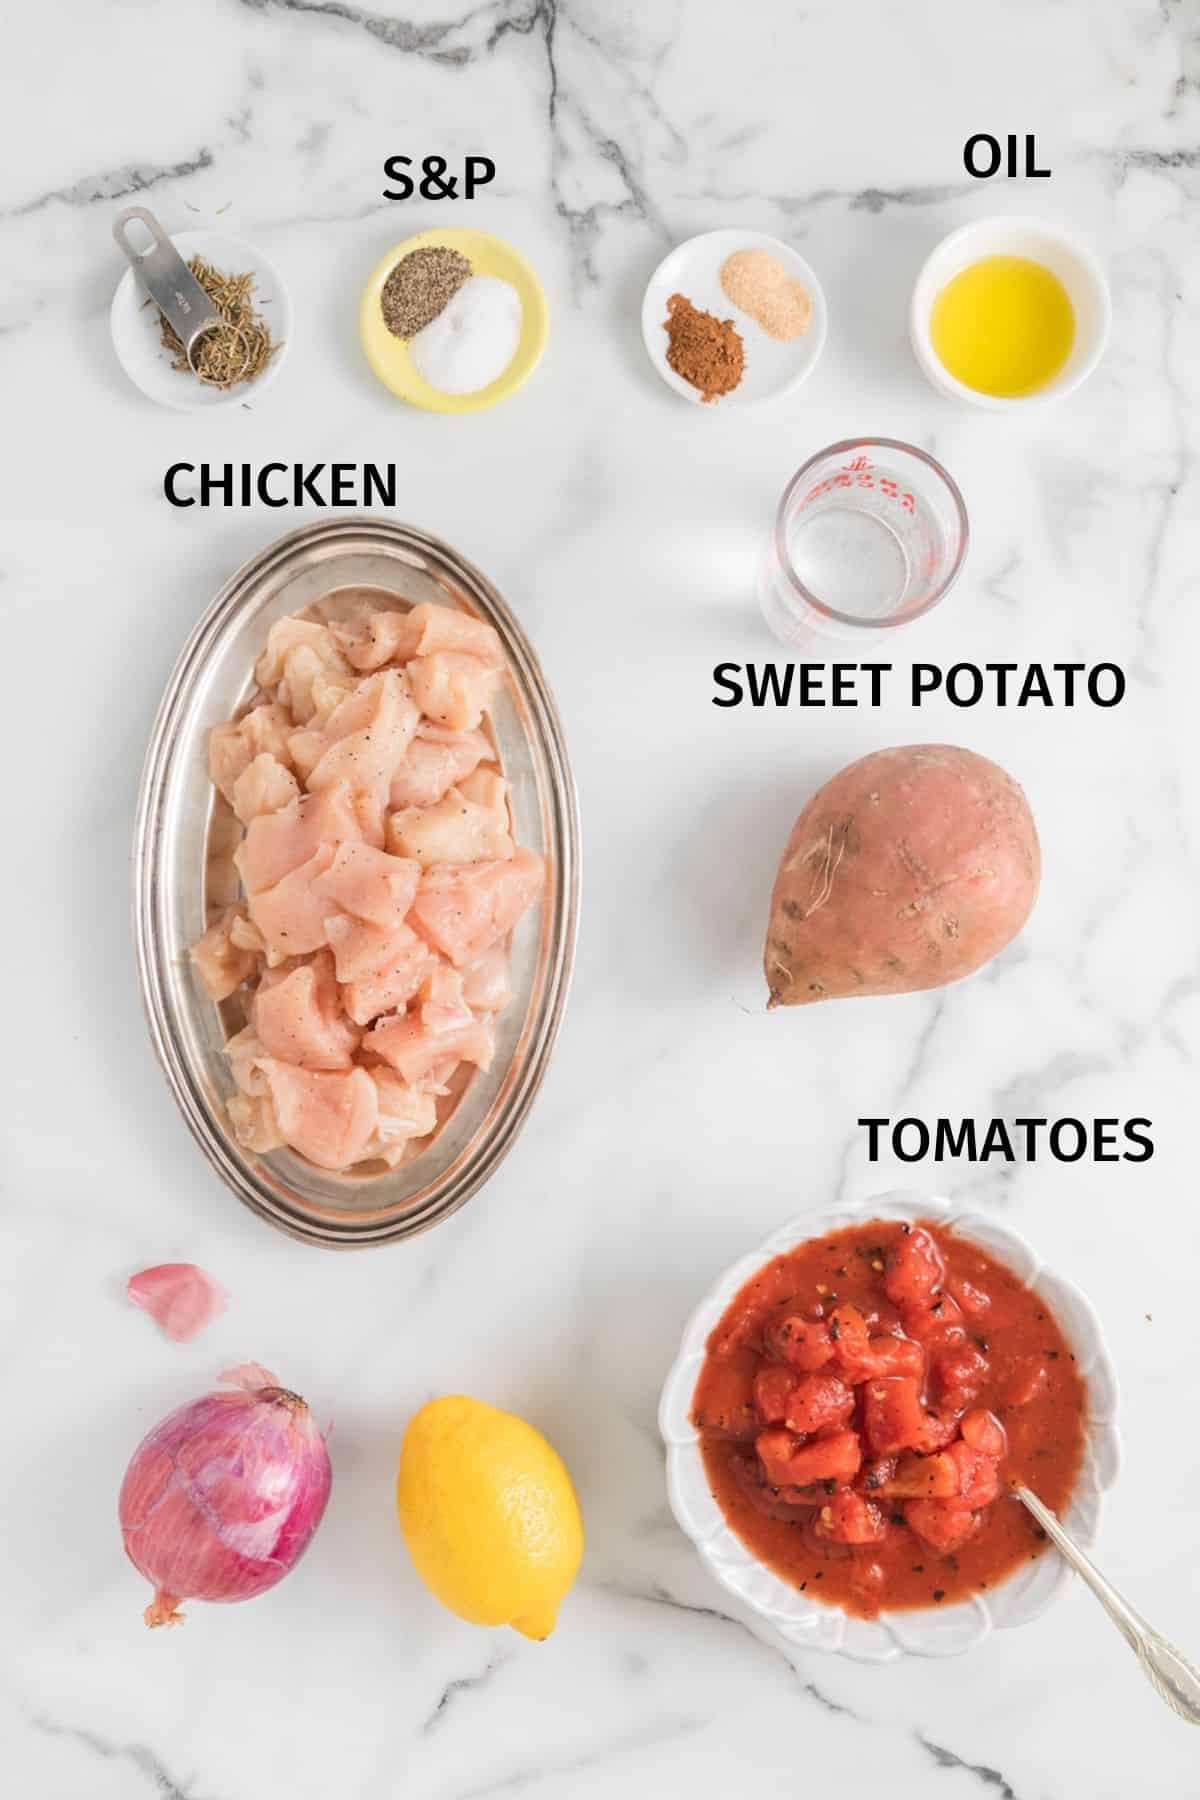 Ingredients for Sweet Potato Chicken in small bowls on a white surface.